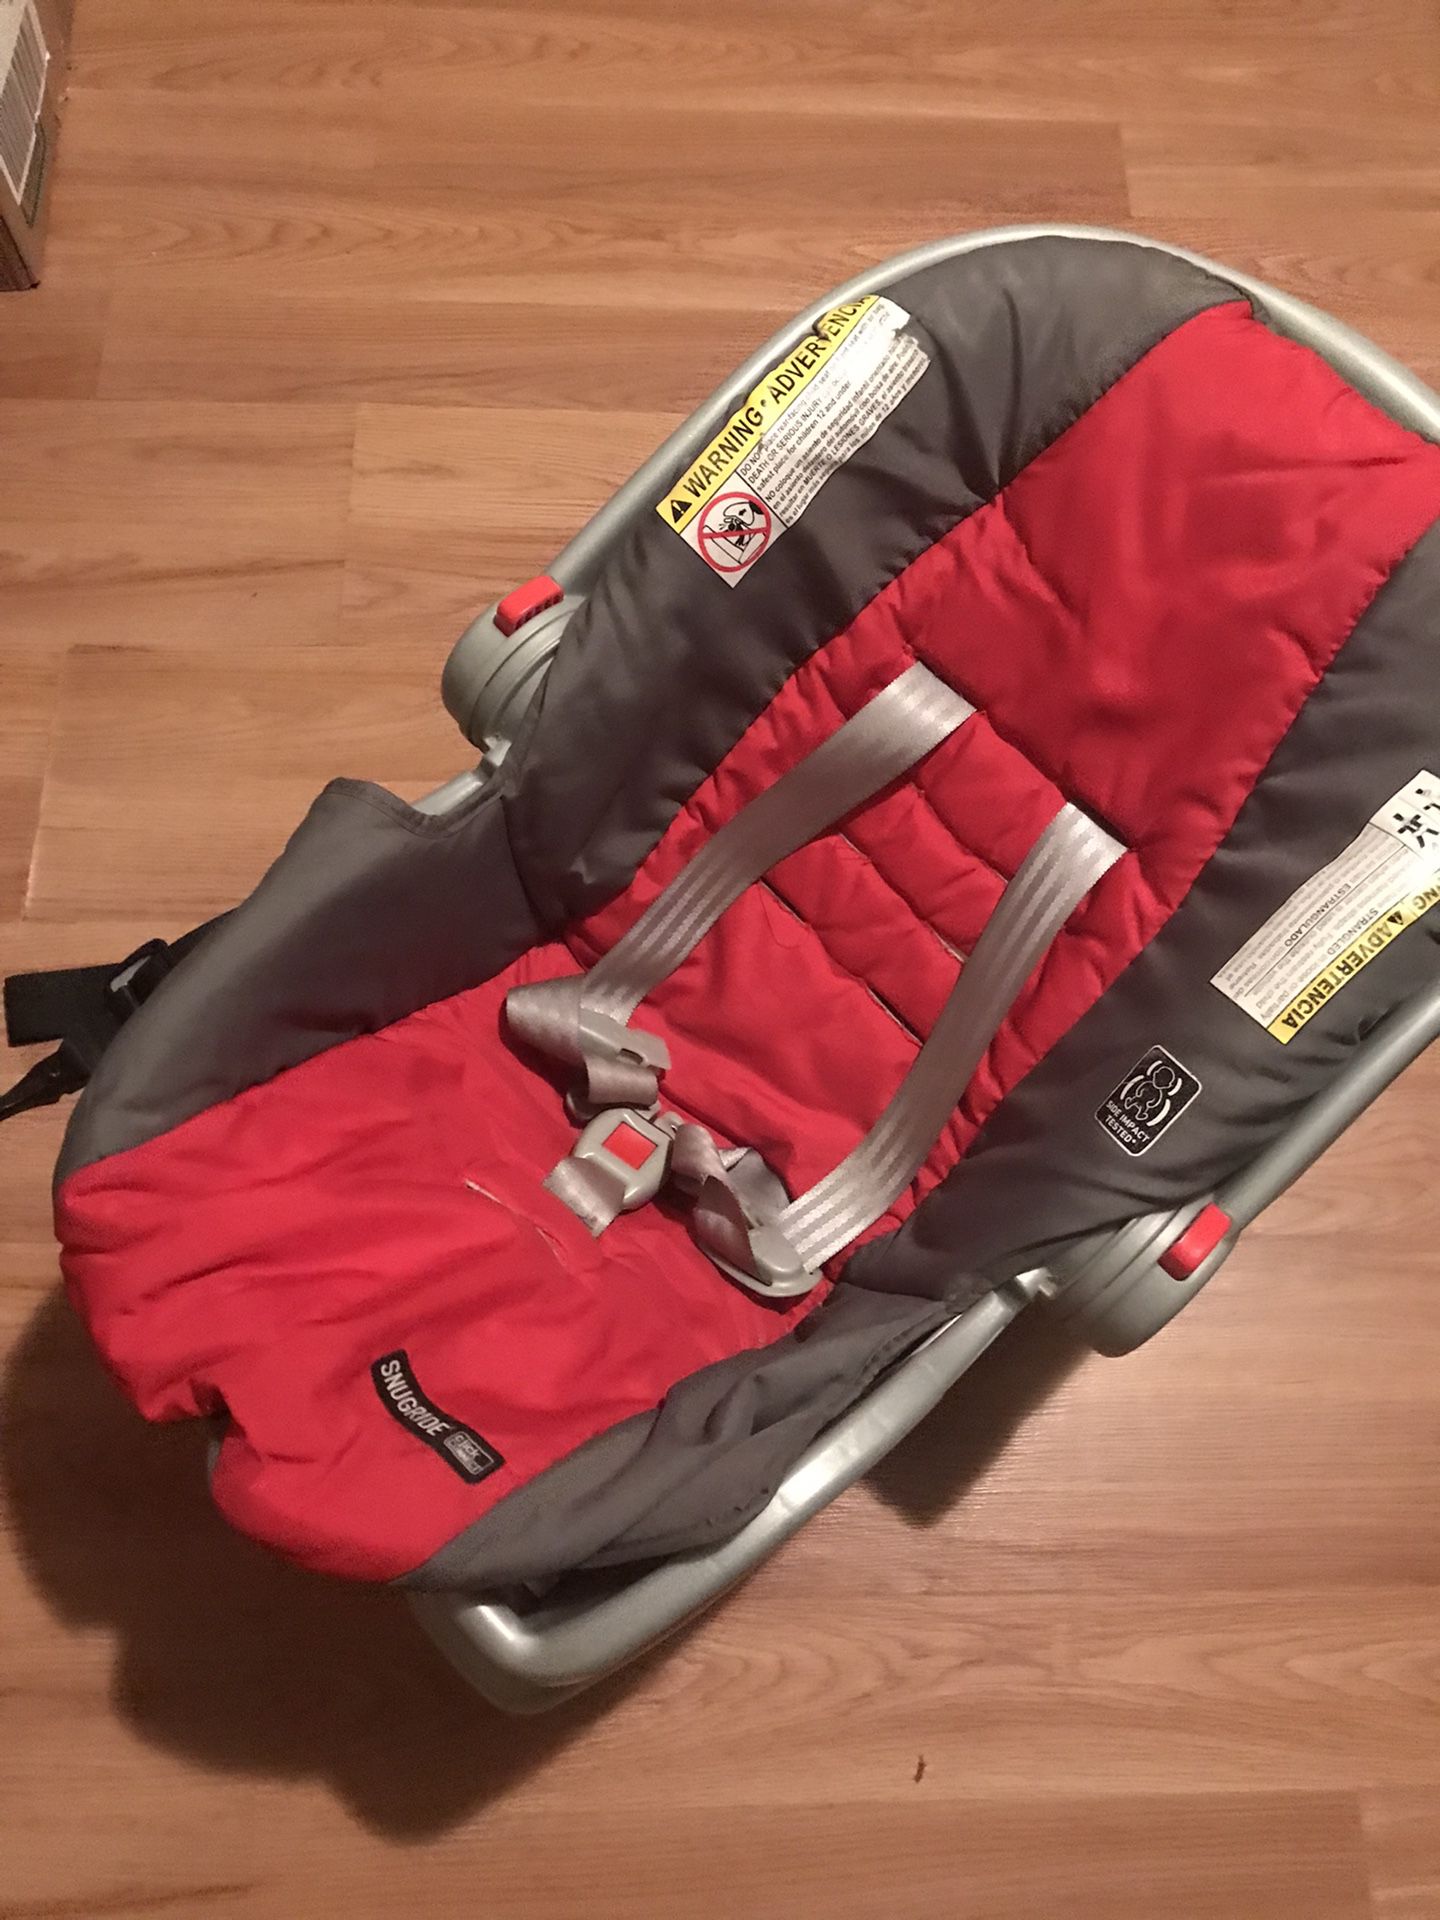 Graco Baby Car Seat Used